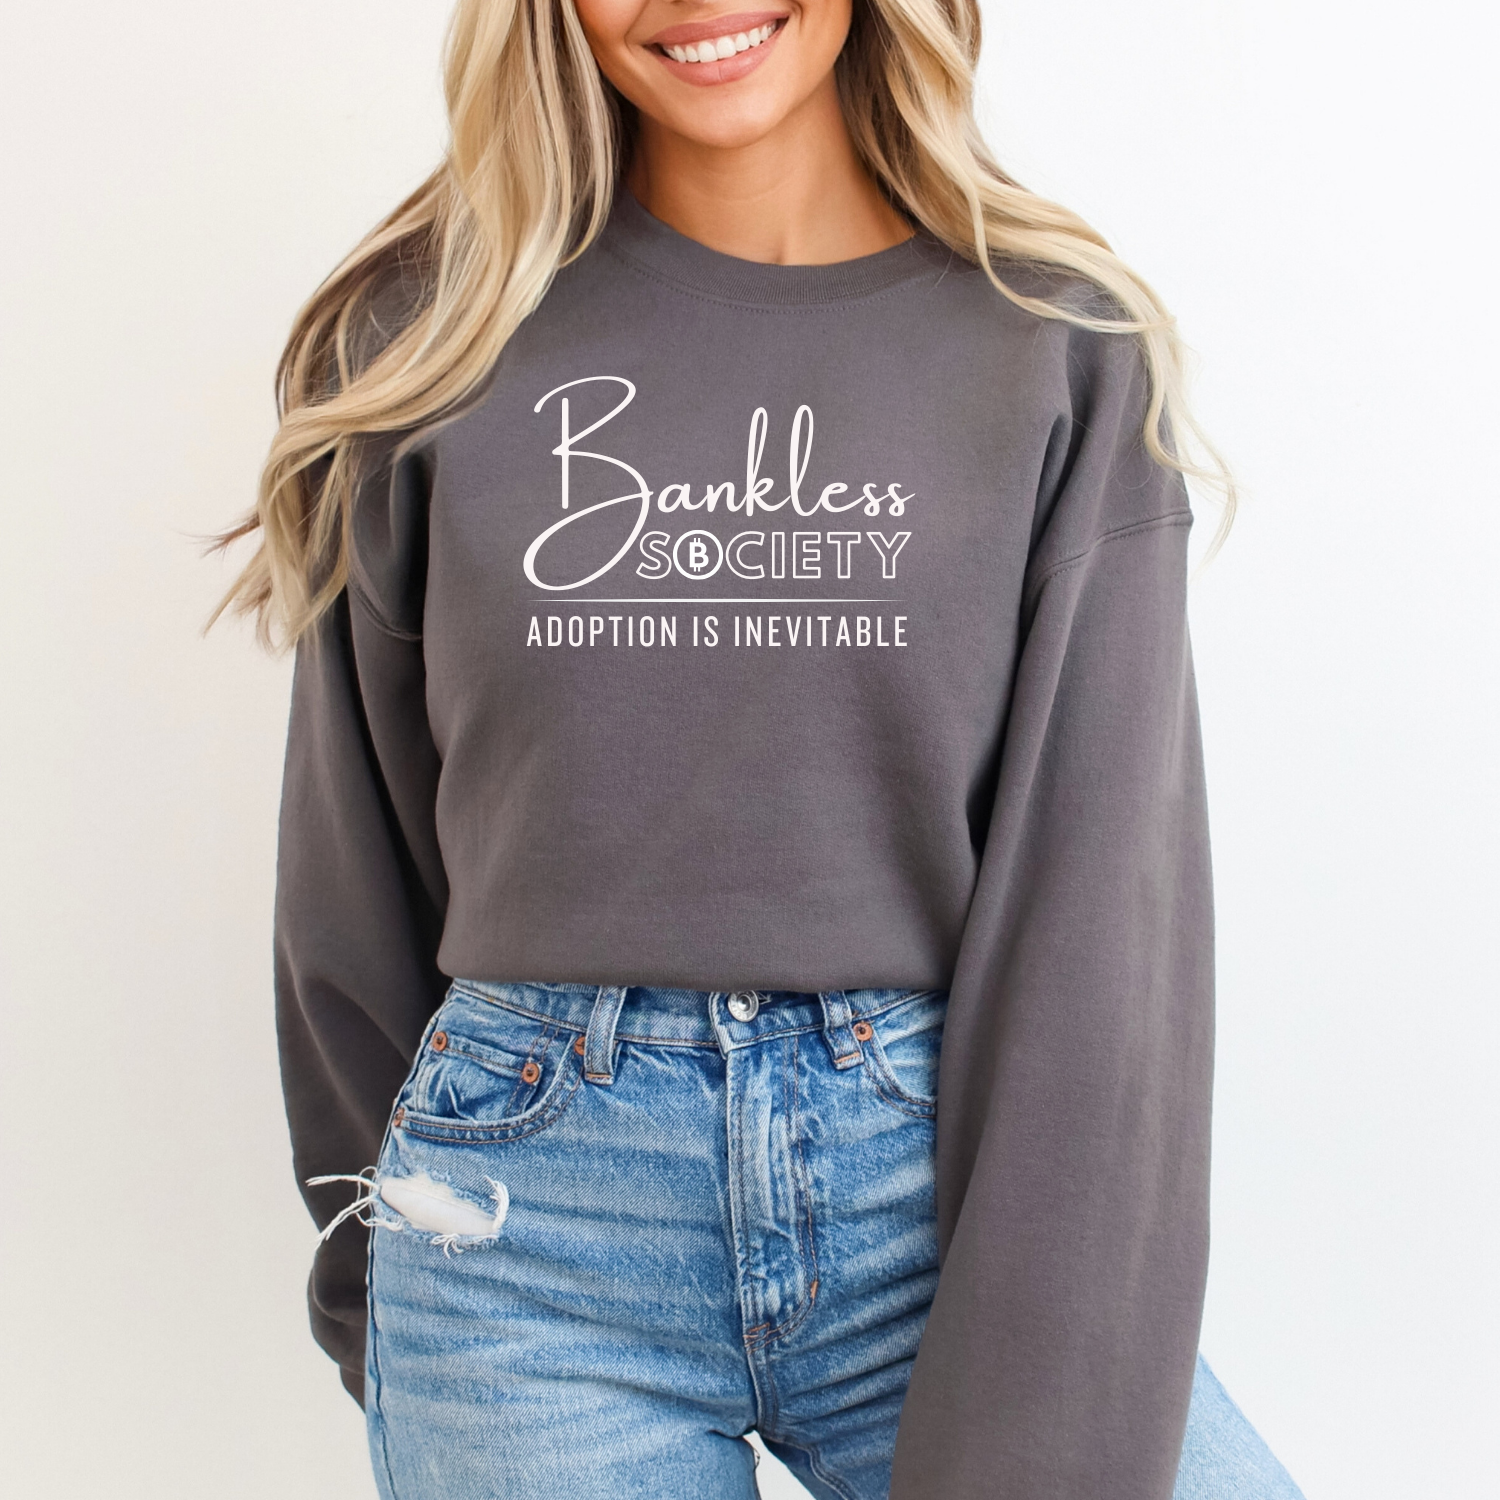 Bankless Society: Adoption is Inevitable sweatshirt for bitcoin believers and decentralization supporters. Color: charcoal.